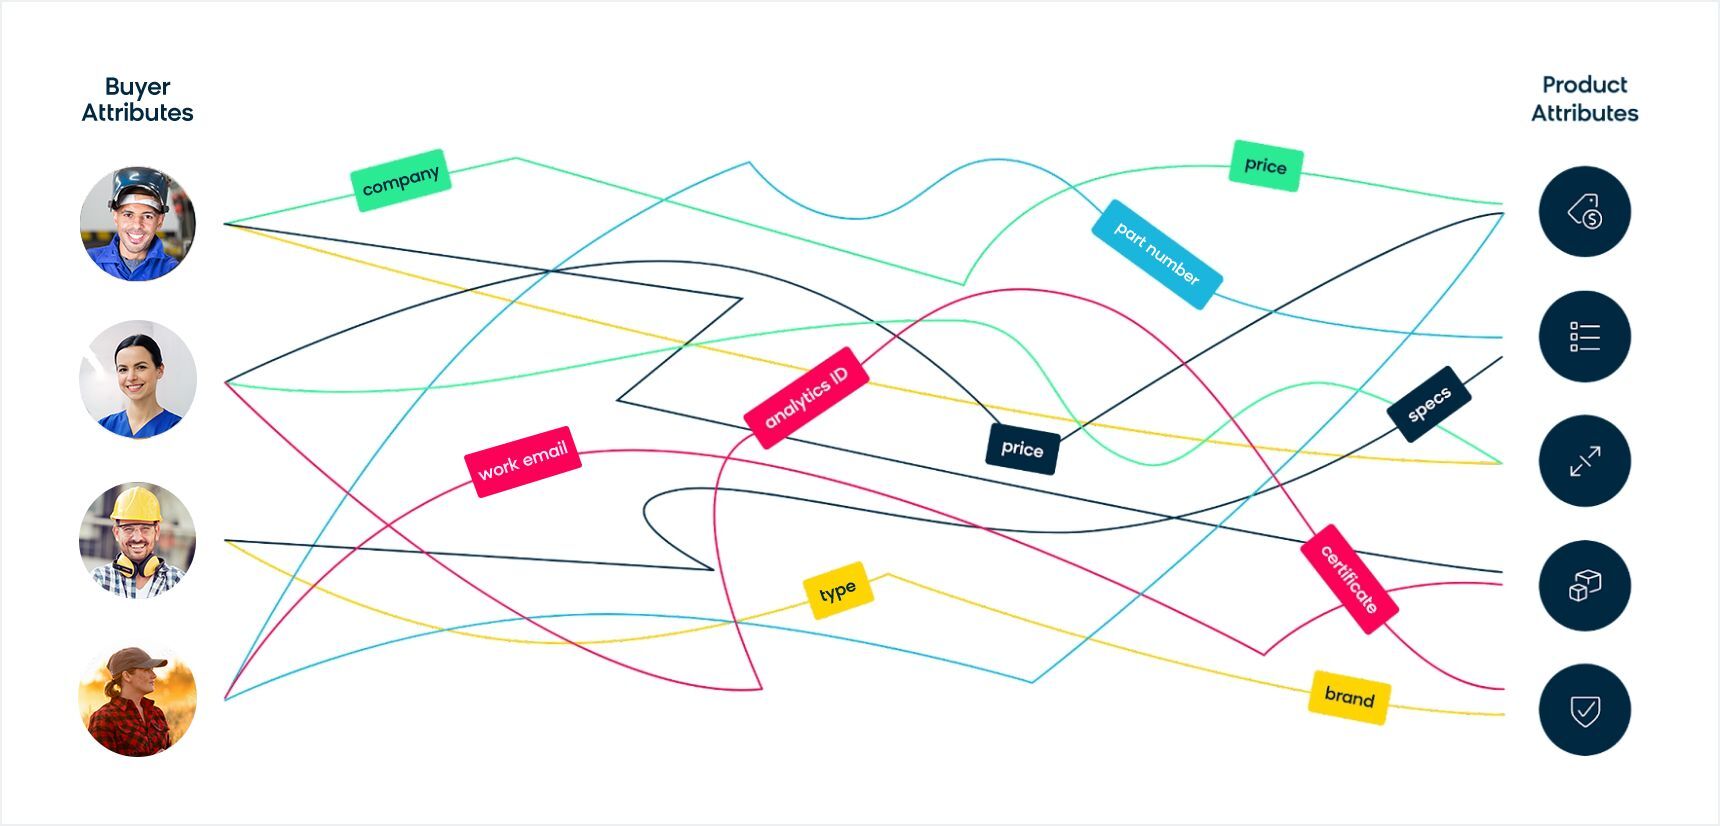 Convoluted Web of Connecting Products to Buyer Attributes